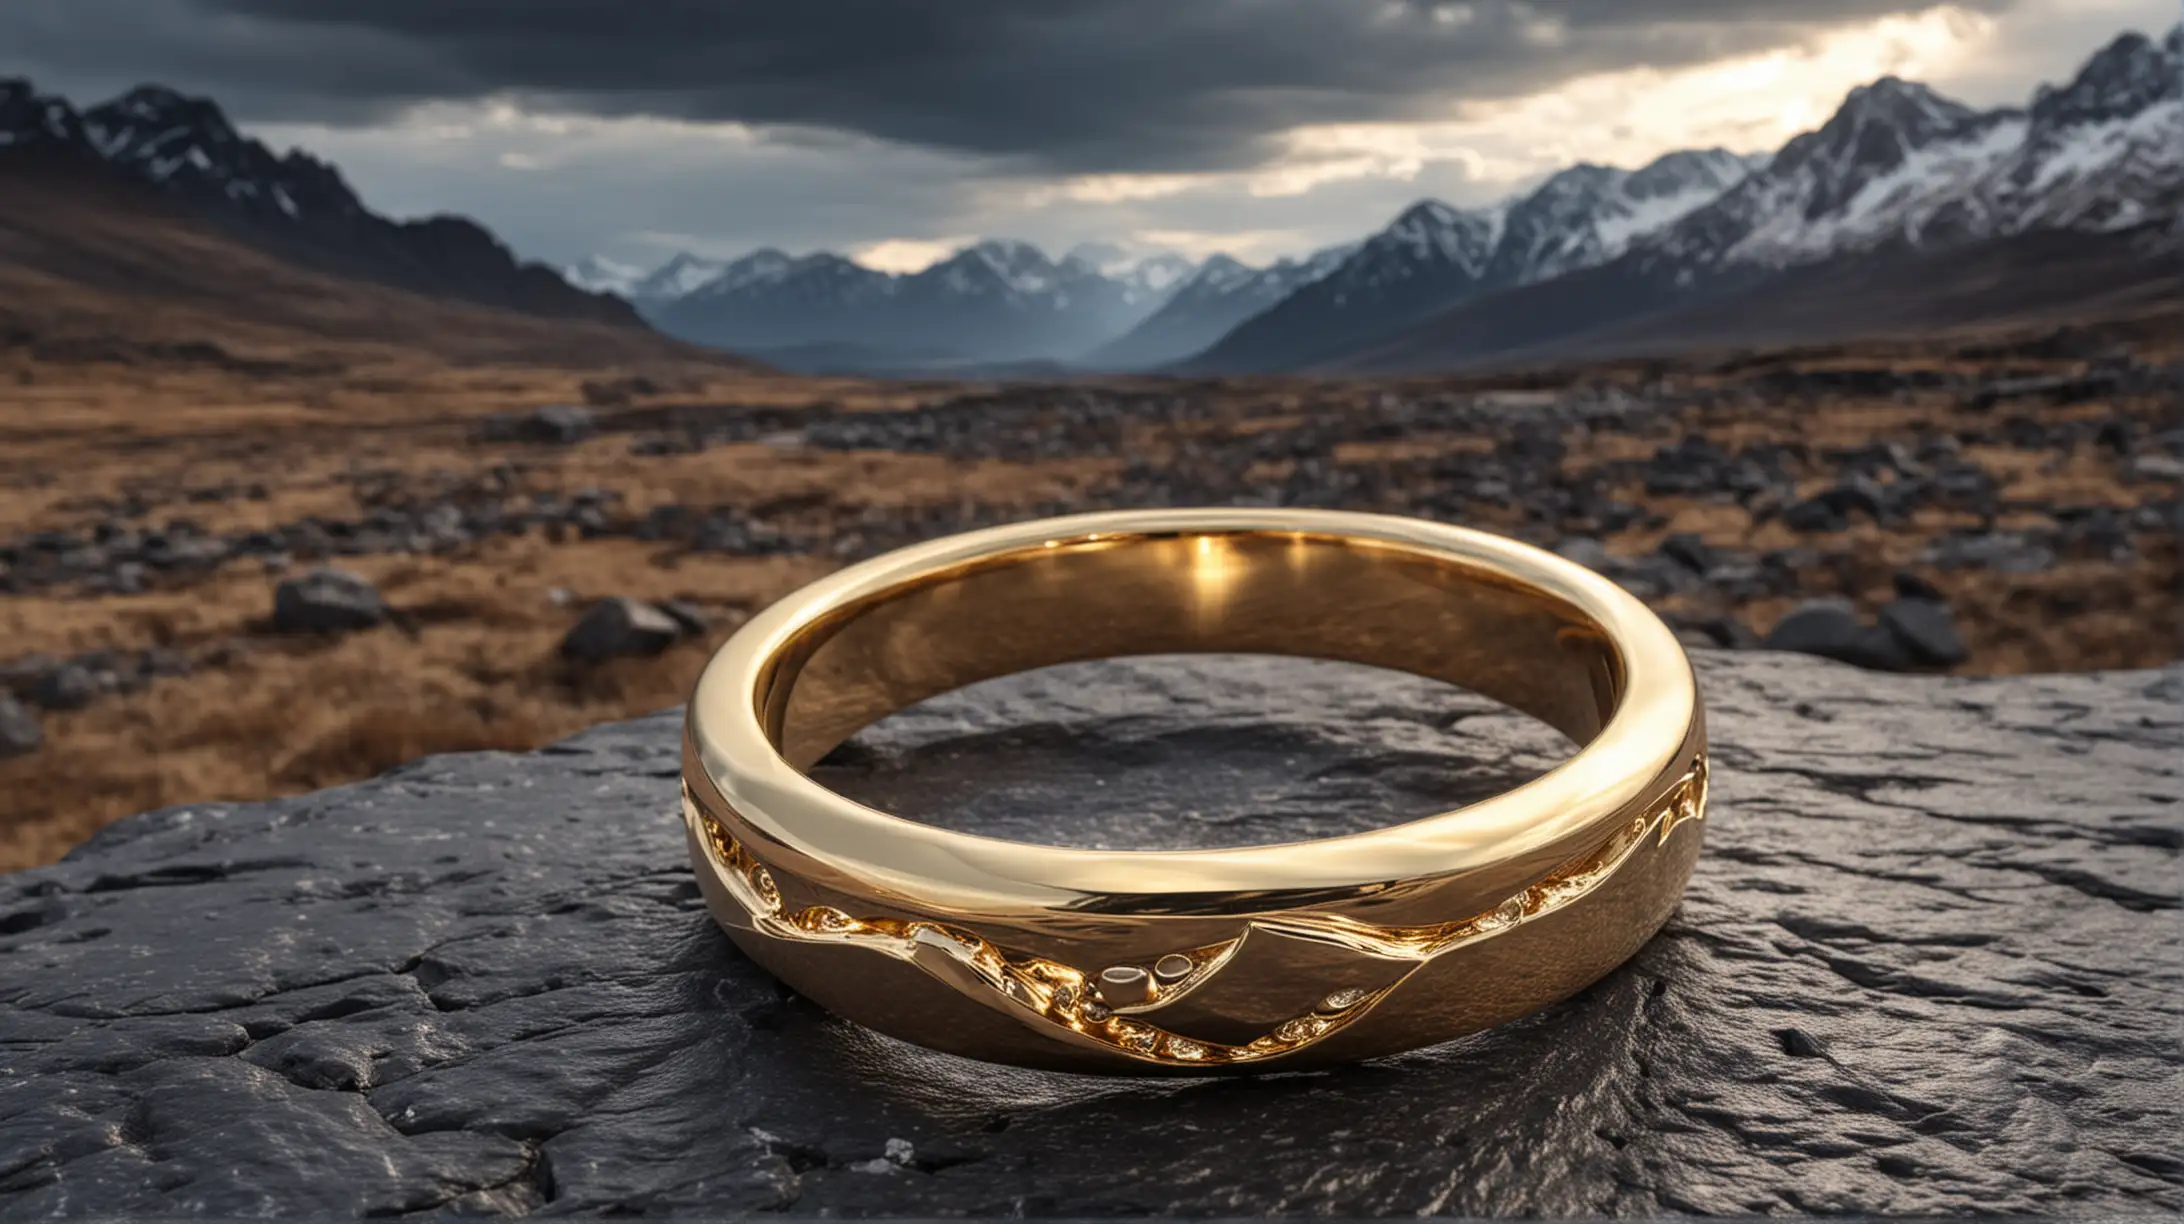 Gleaming Golden Ring Resting on Stone Amidst Majestic Mountain Range